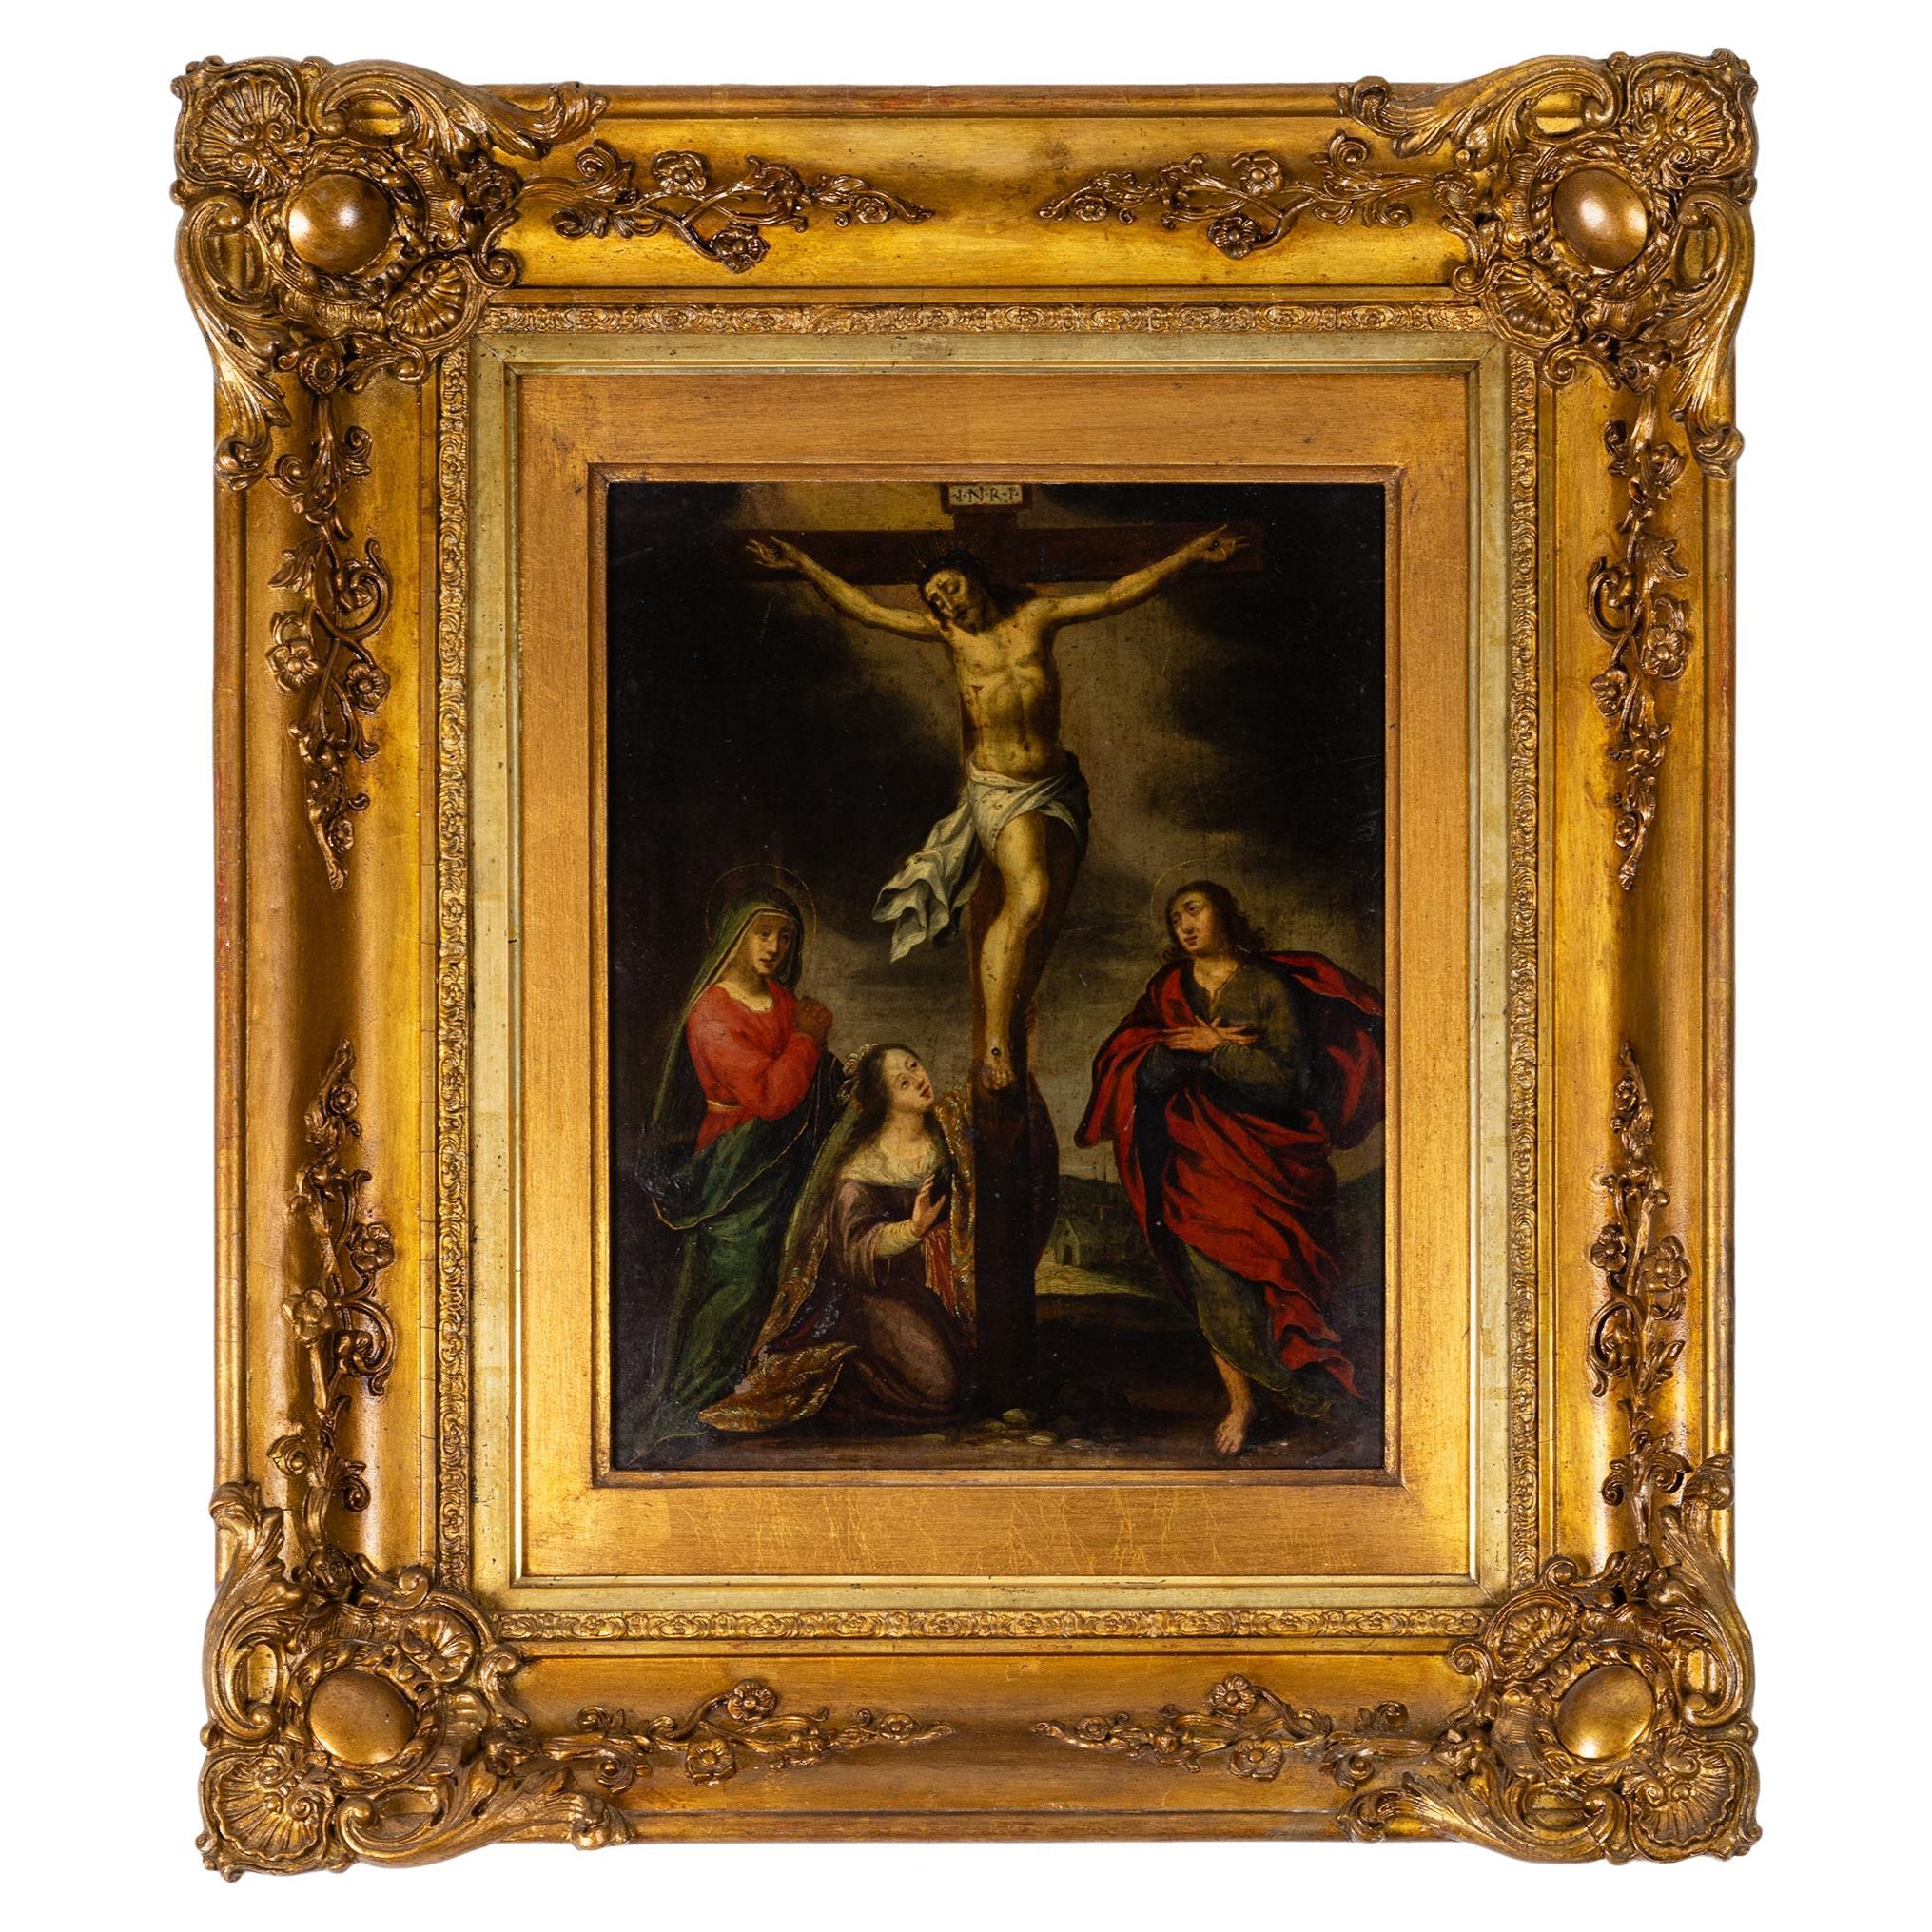 Baroque Painting Of The Crucifixion Of Christ, 17th Century - Religious Art For Sale